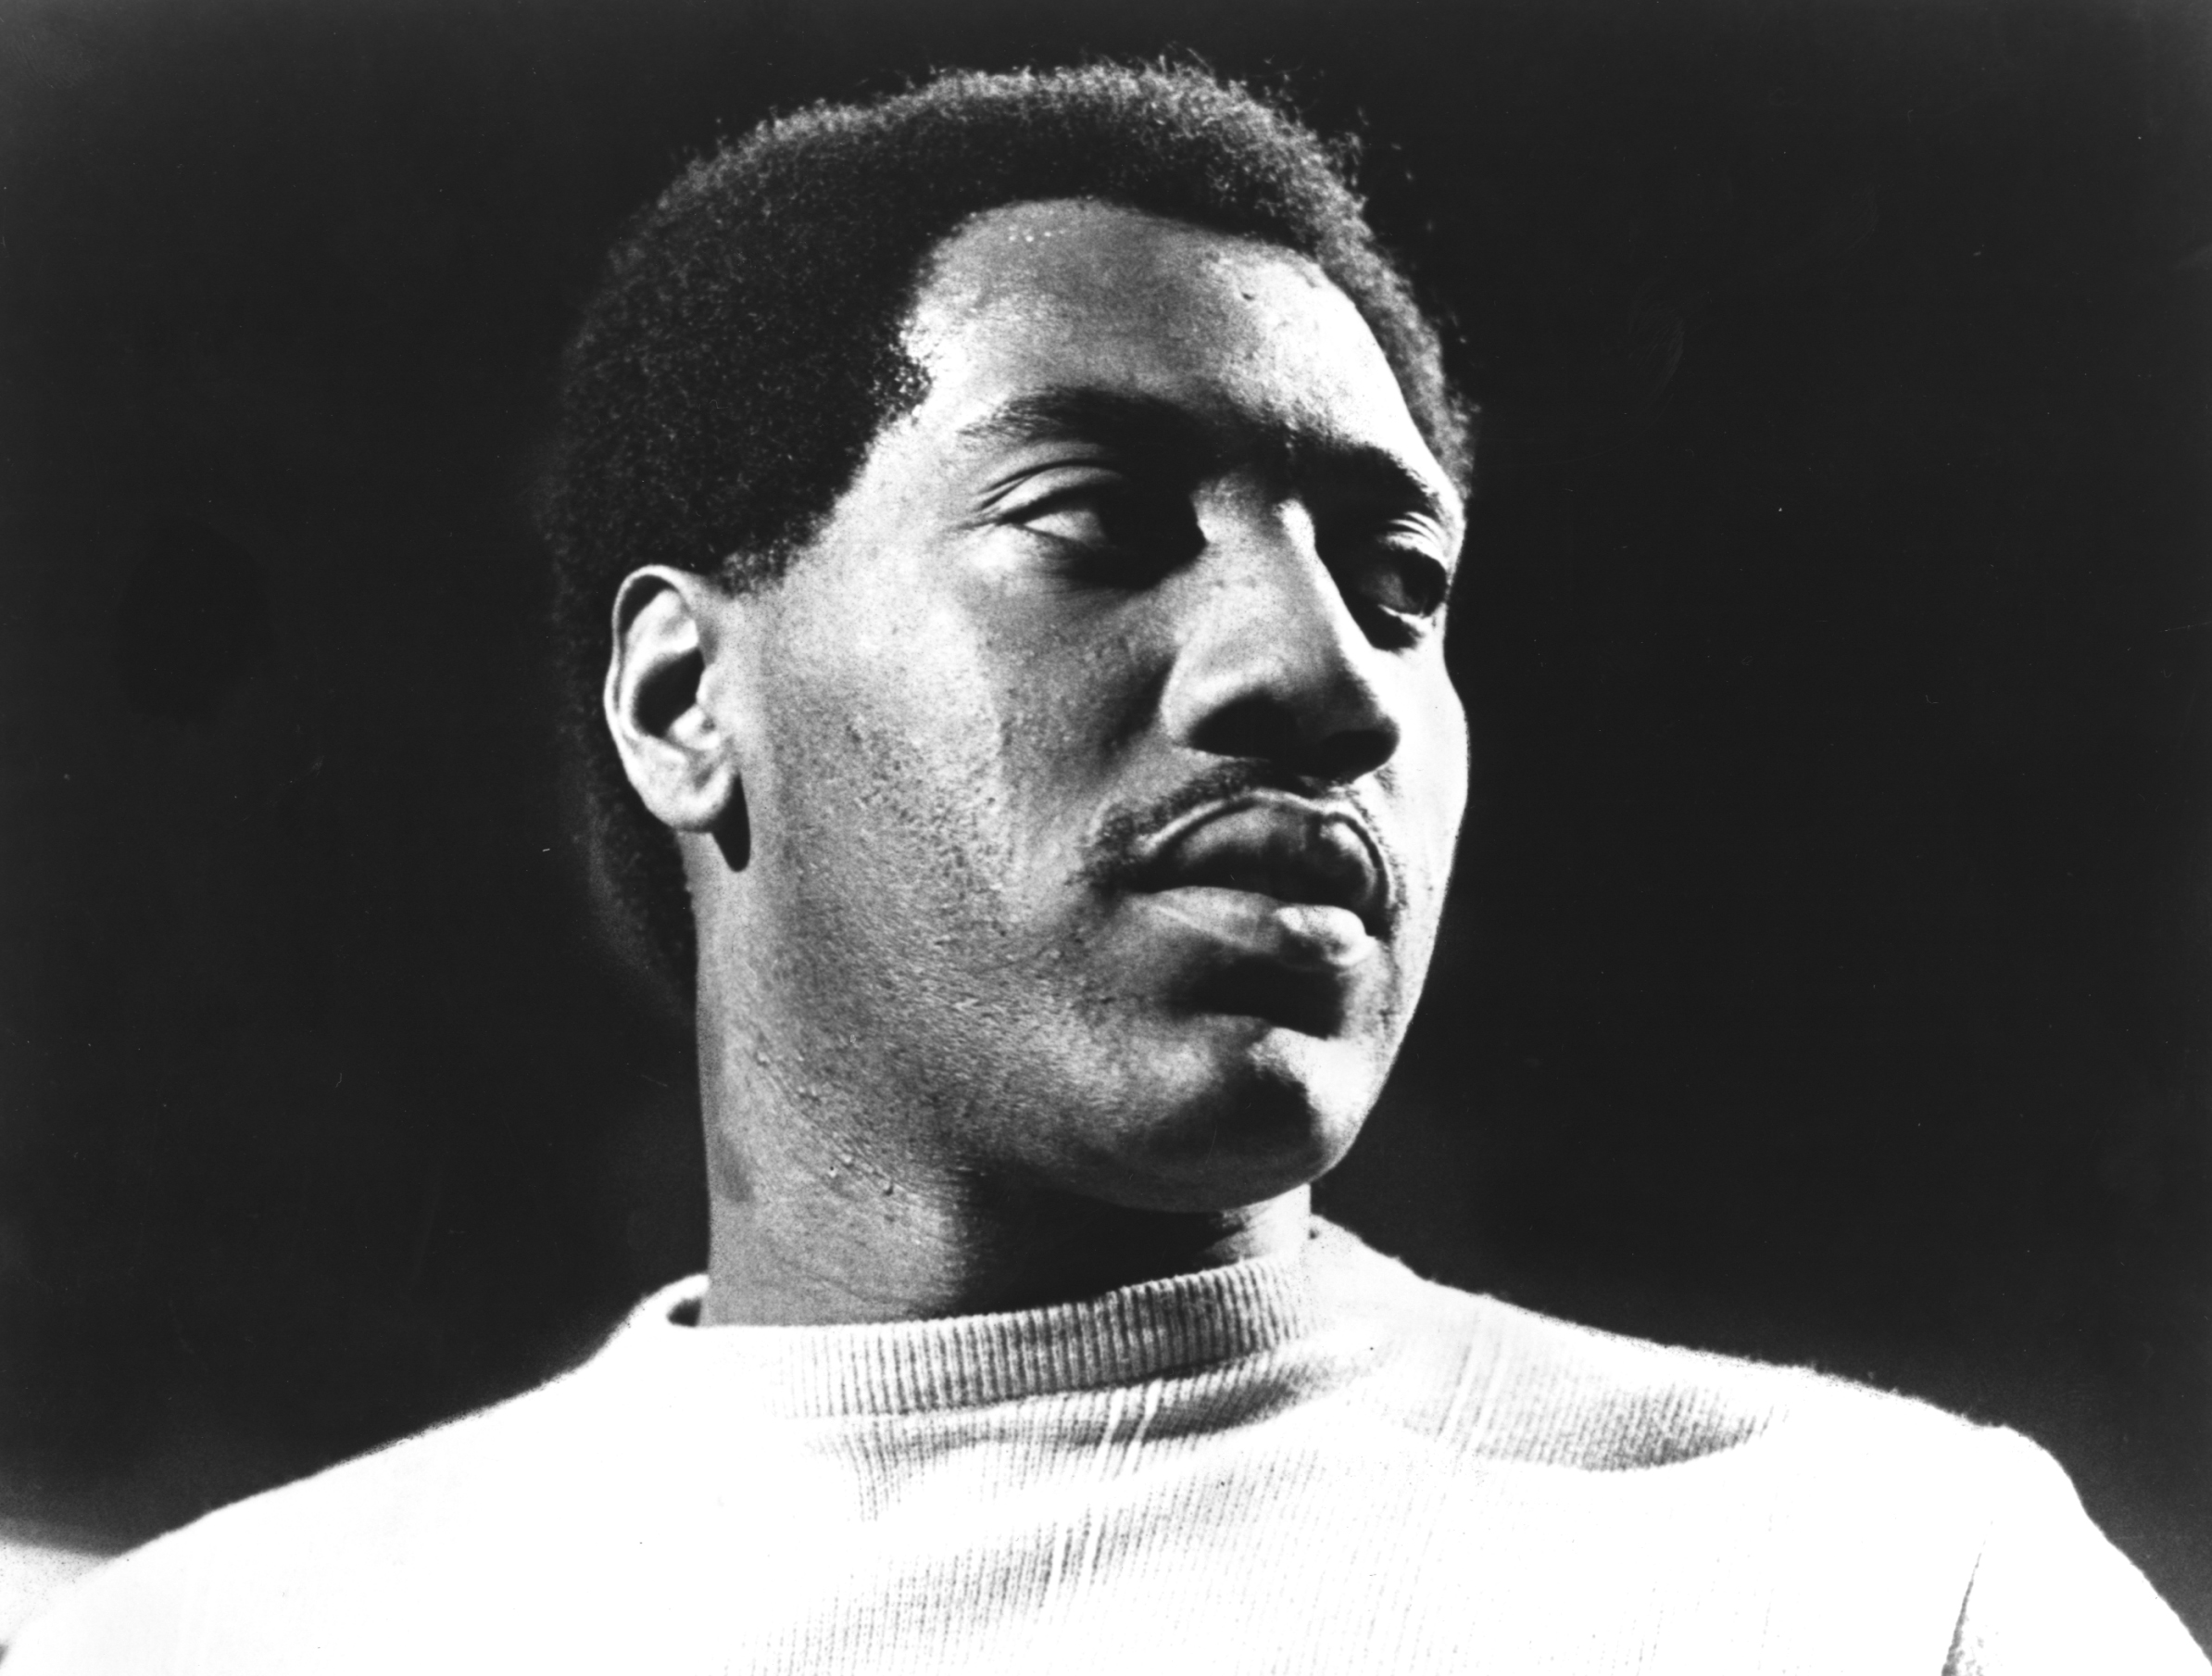 REVISITING OTIS REDDING’S DOCK OF THE BAY SESSIONS